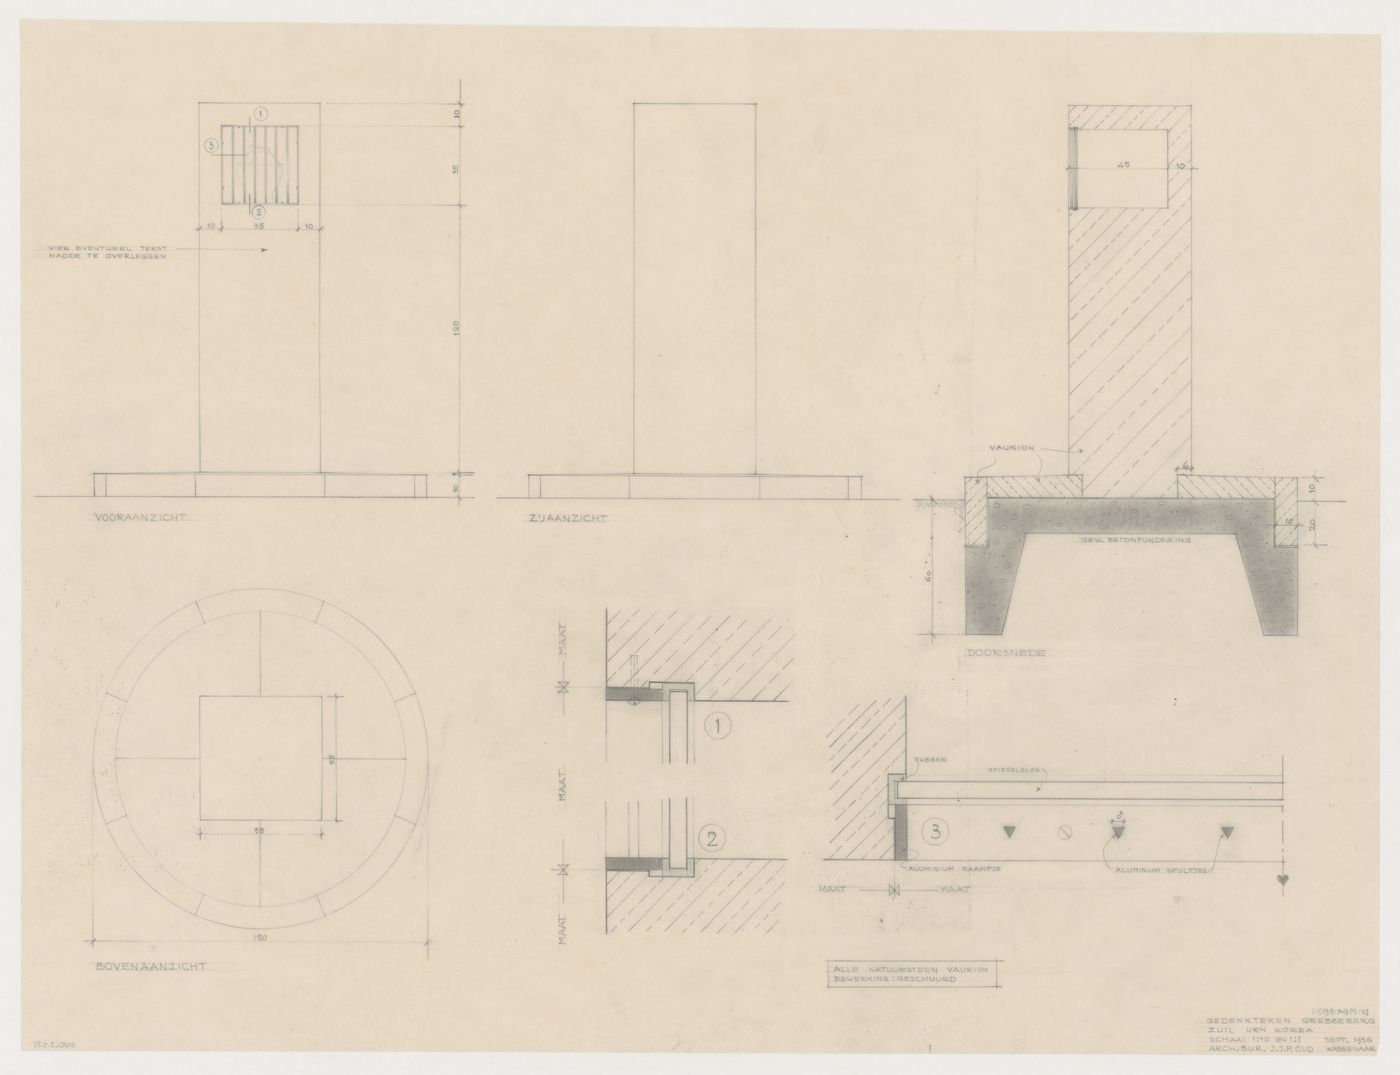 Plan, section, removed sections, and elevations for Grebbeberg Monument, Rhenen, Netherlands